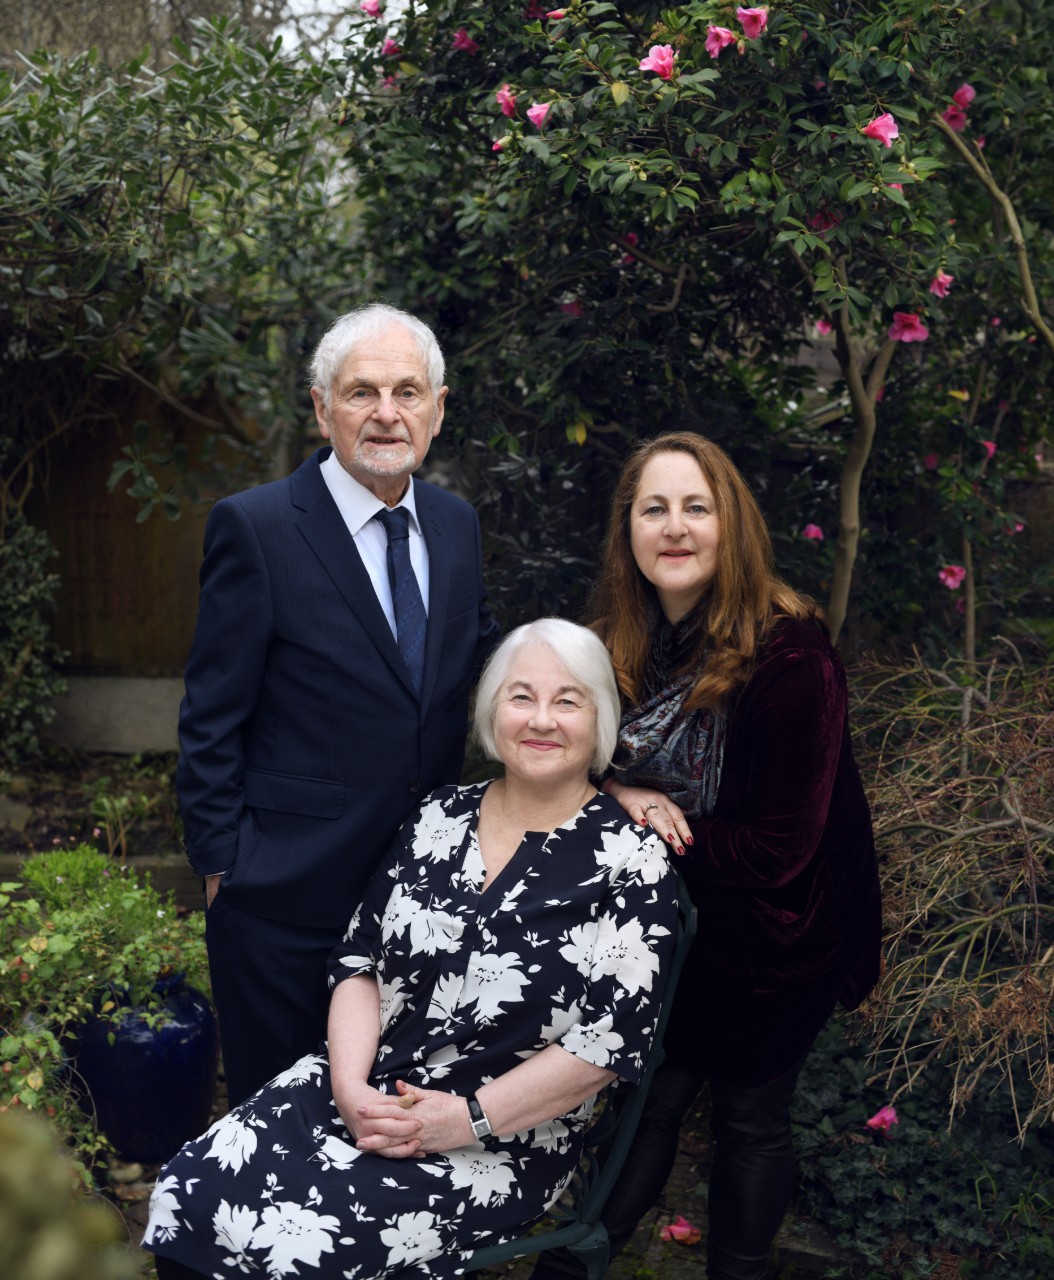 Joan Salter with her husband, Martin, and daughter, Shelley, © Frederic Aranda